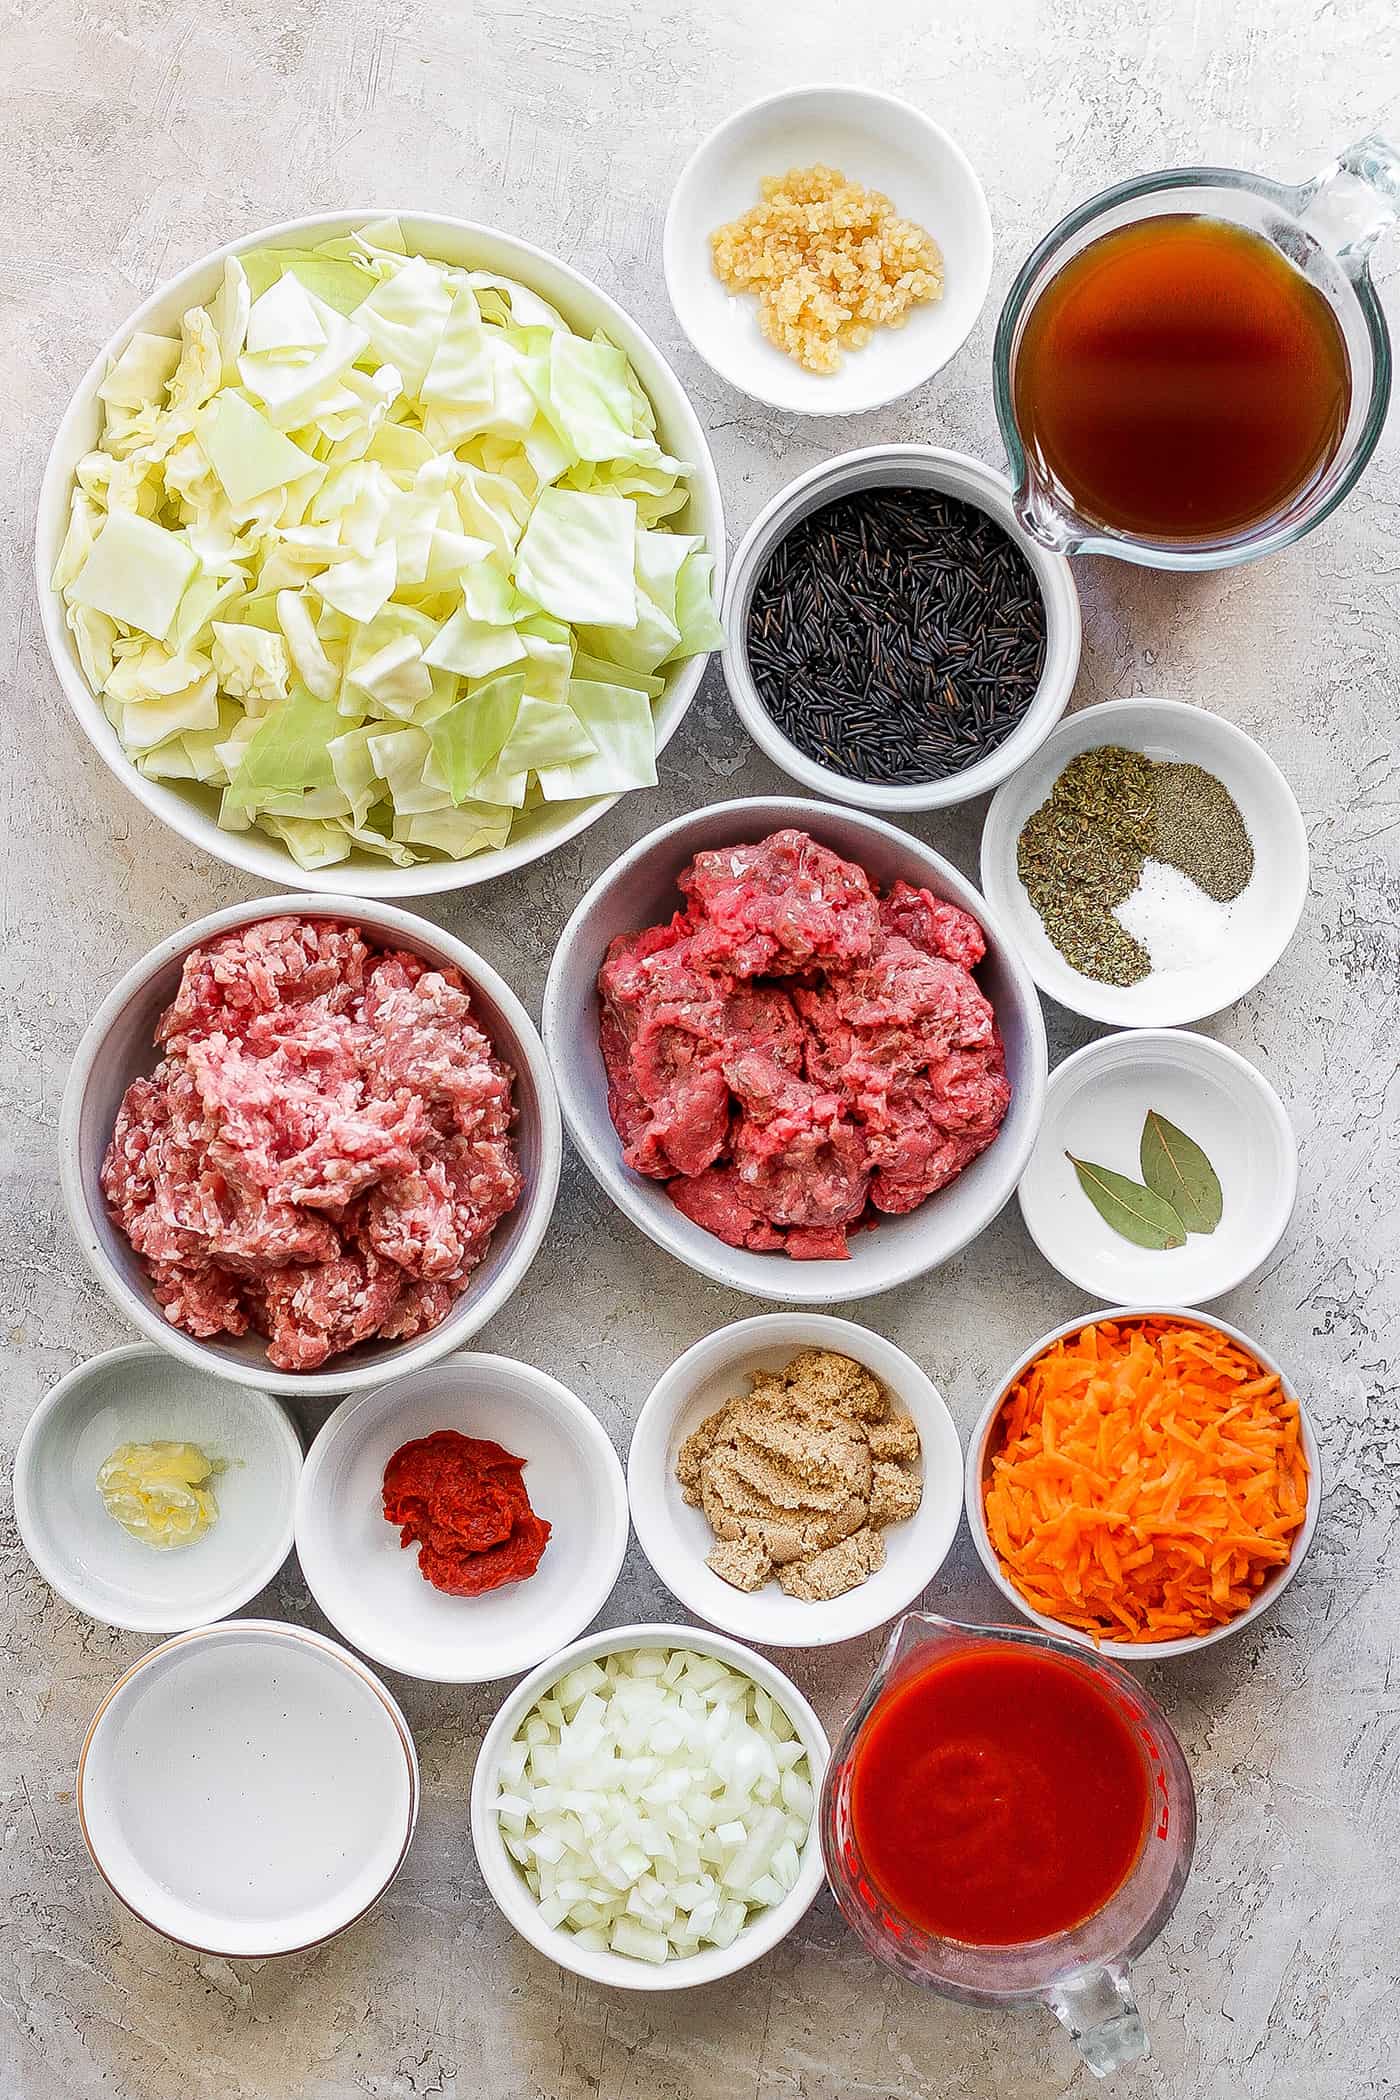 The ingredients for unstuffed cabbage roll soup are shown portioned out in bowls: green cabbage, pork, meat, spices, carrots, garlic, onion, broth, tomato sauce, tomato paste, salt and pepper.